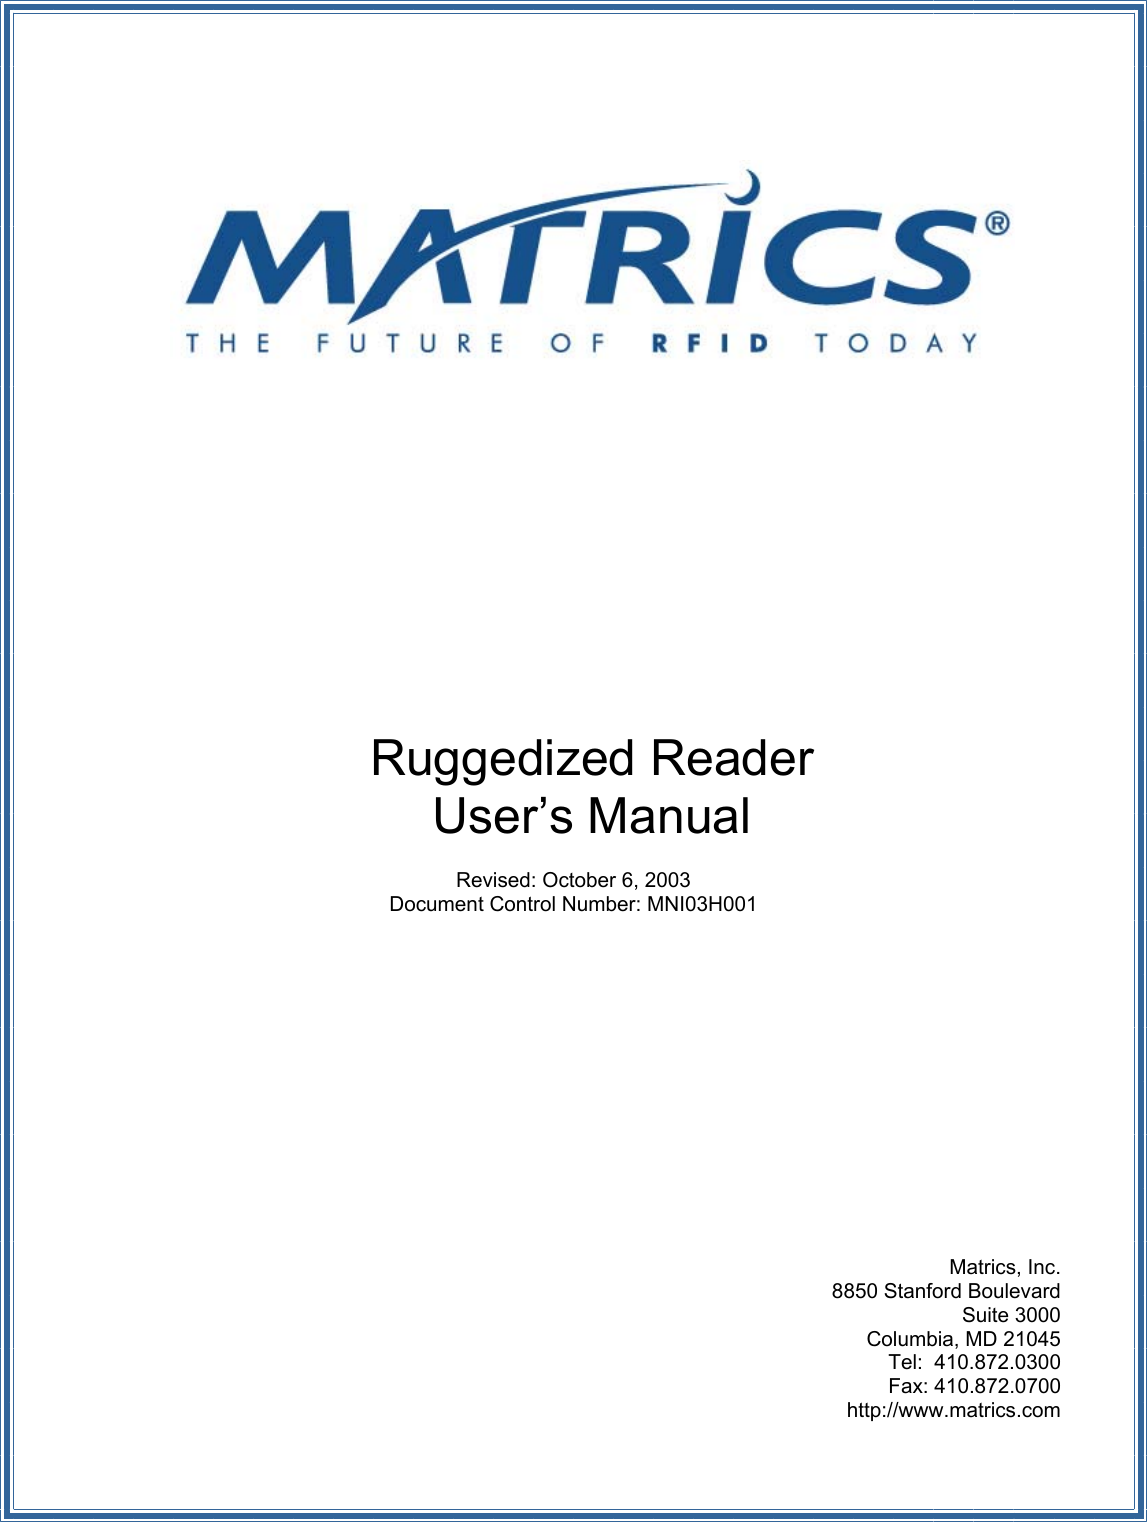              Ruggedized Reader User’s Manual  Revised: October 6, 2003 Document Control Number: MNI03H001               Matrics, Inc. 8850 Stanford Boulevard Suite 3000 Columbia, MD 21045 Tel:  410.872.0300  Fax: 410.872.0700  http://www.matrics.com 